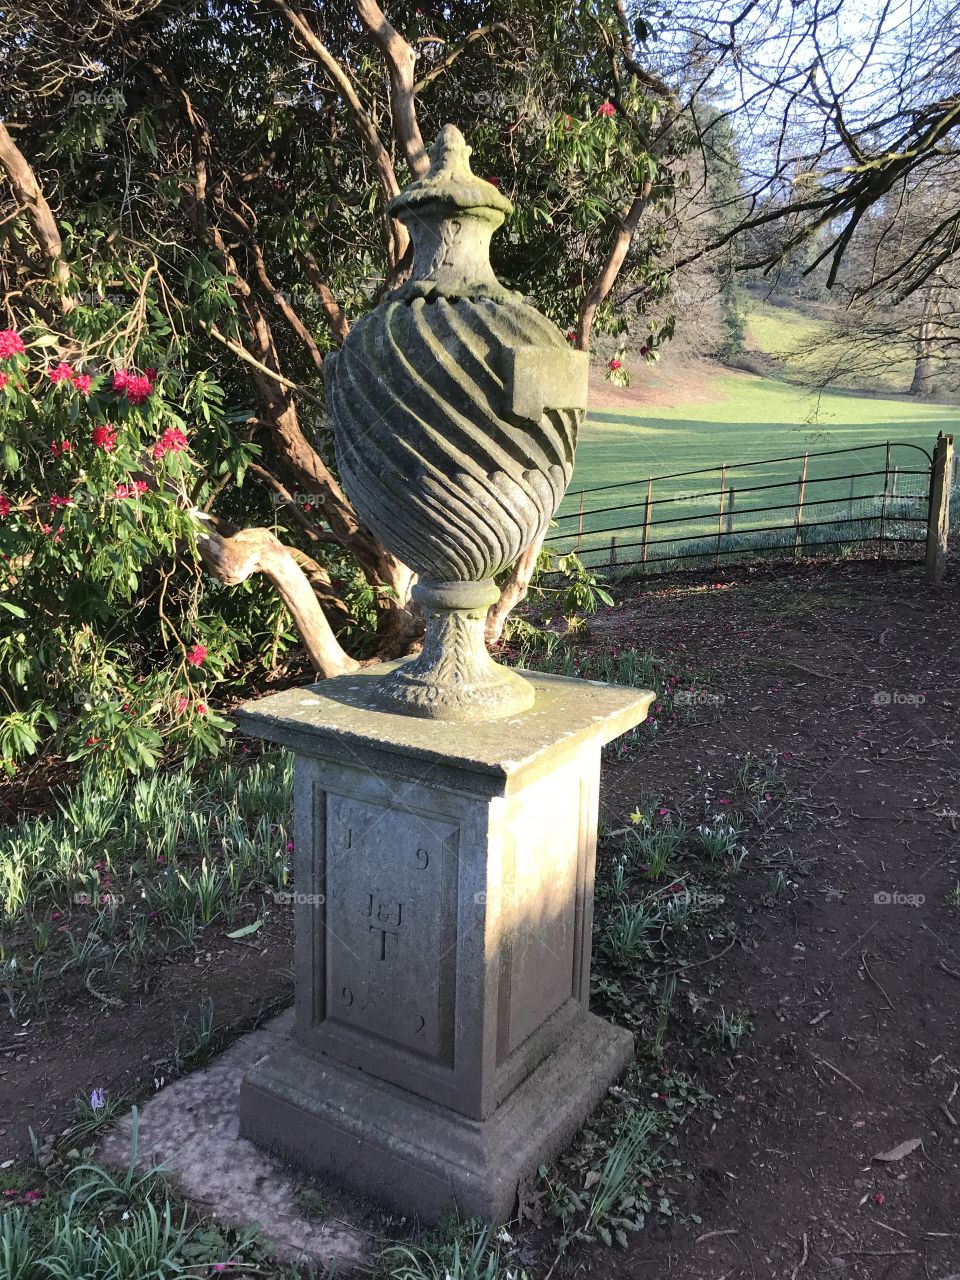 This ornamental feature, guides you to a beautiful piece of Devon treasure.